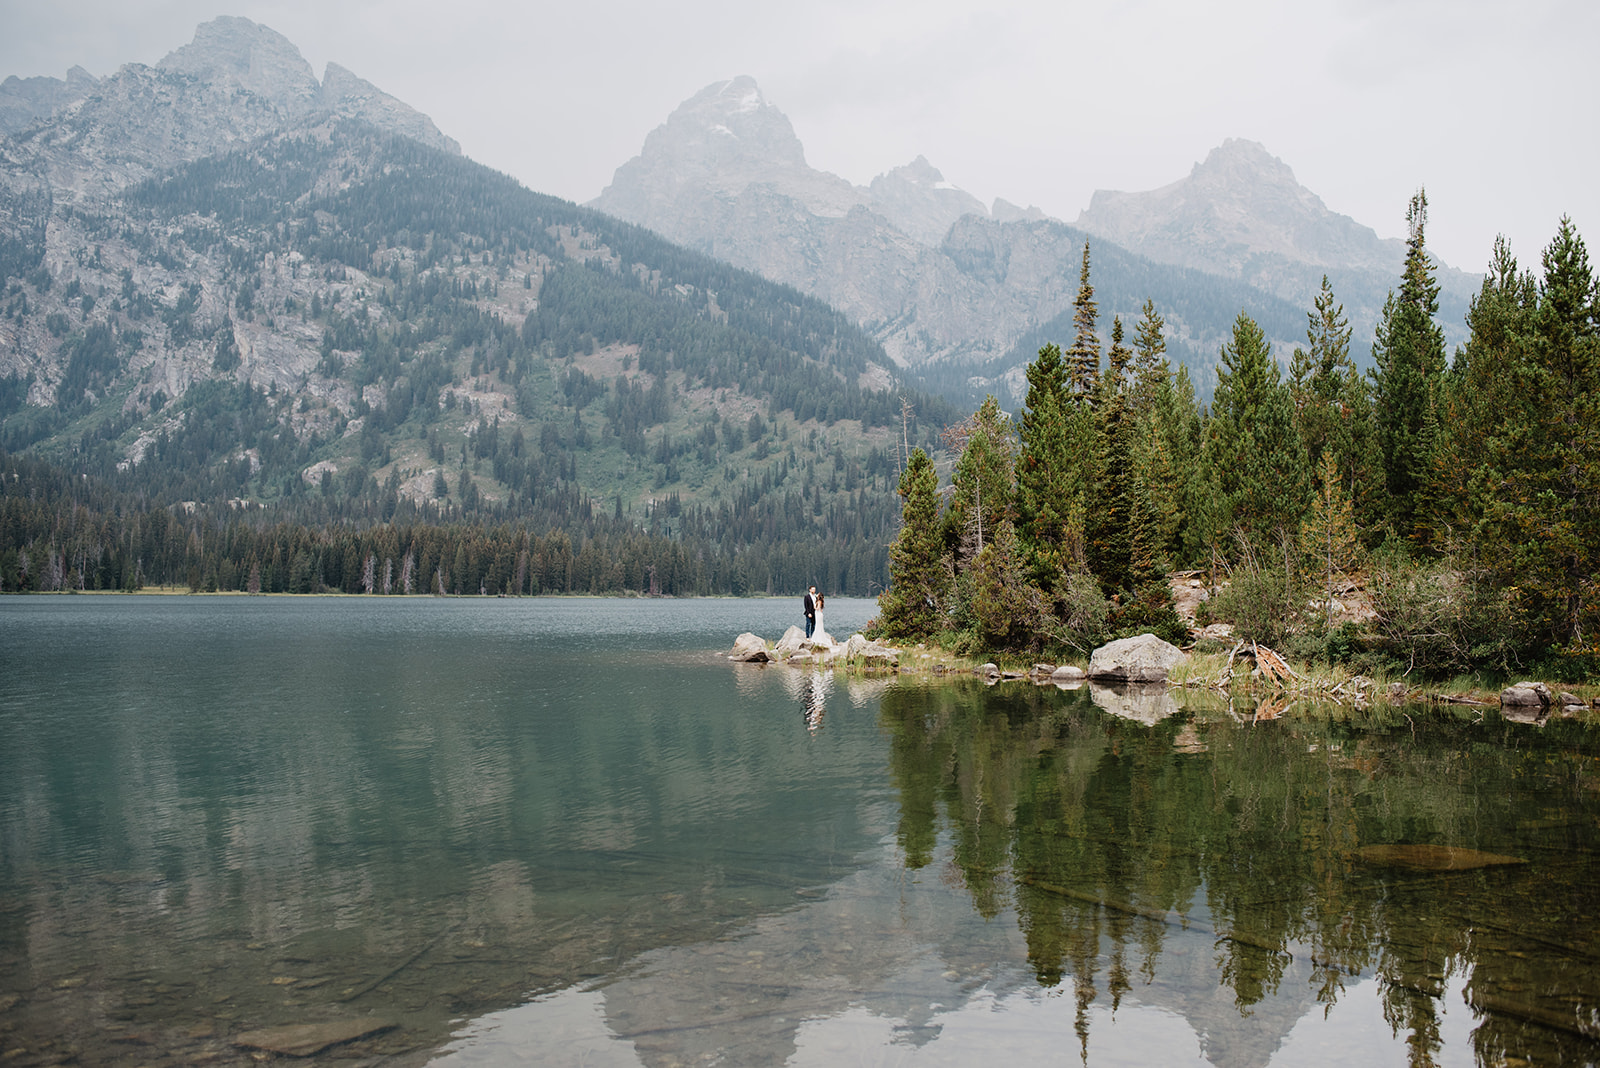 stunning image of Taggart Lake wedding taken by Grand Teton wedding photographer with bride and groom in the distance on a small rock in the lake and the Tetons reflecting into the water